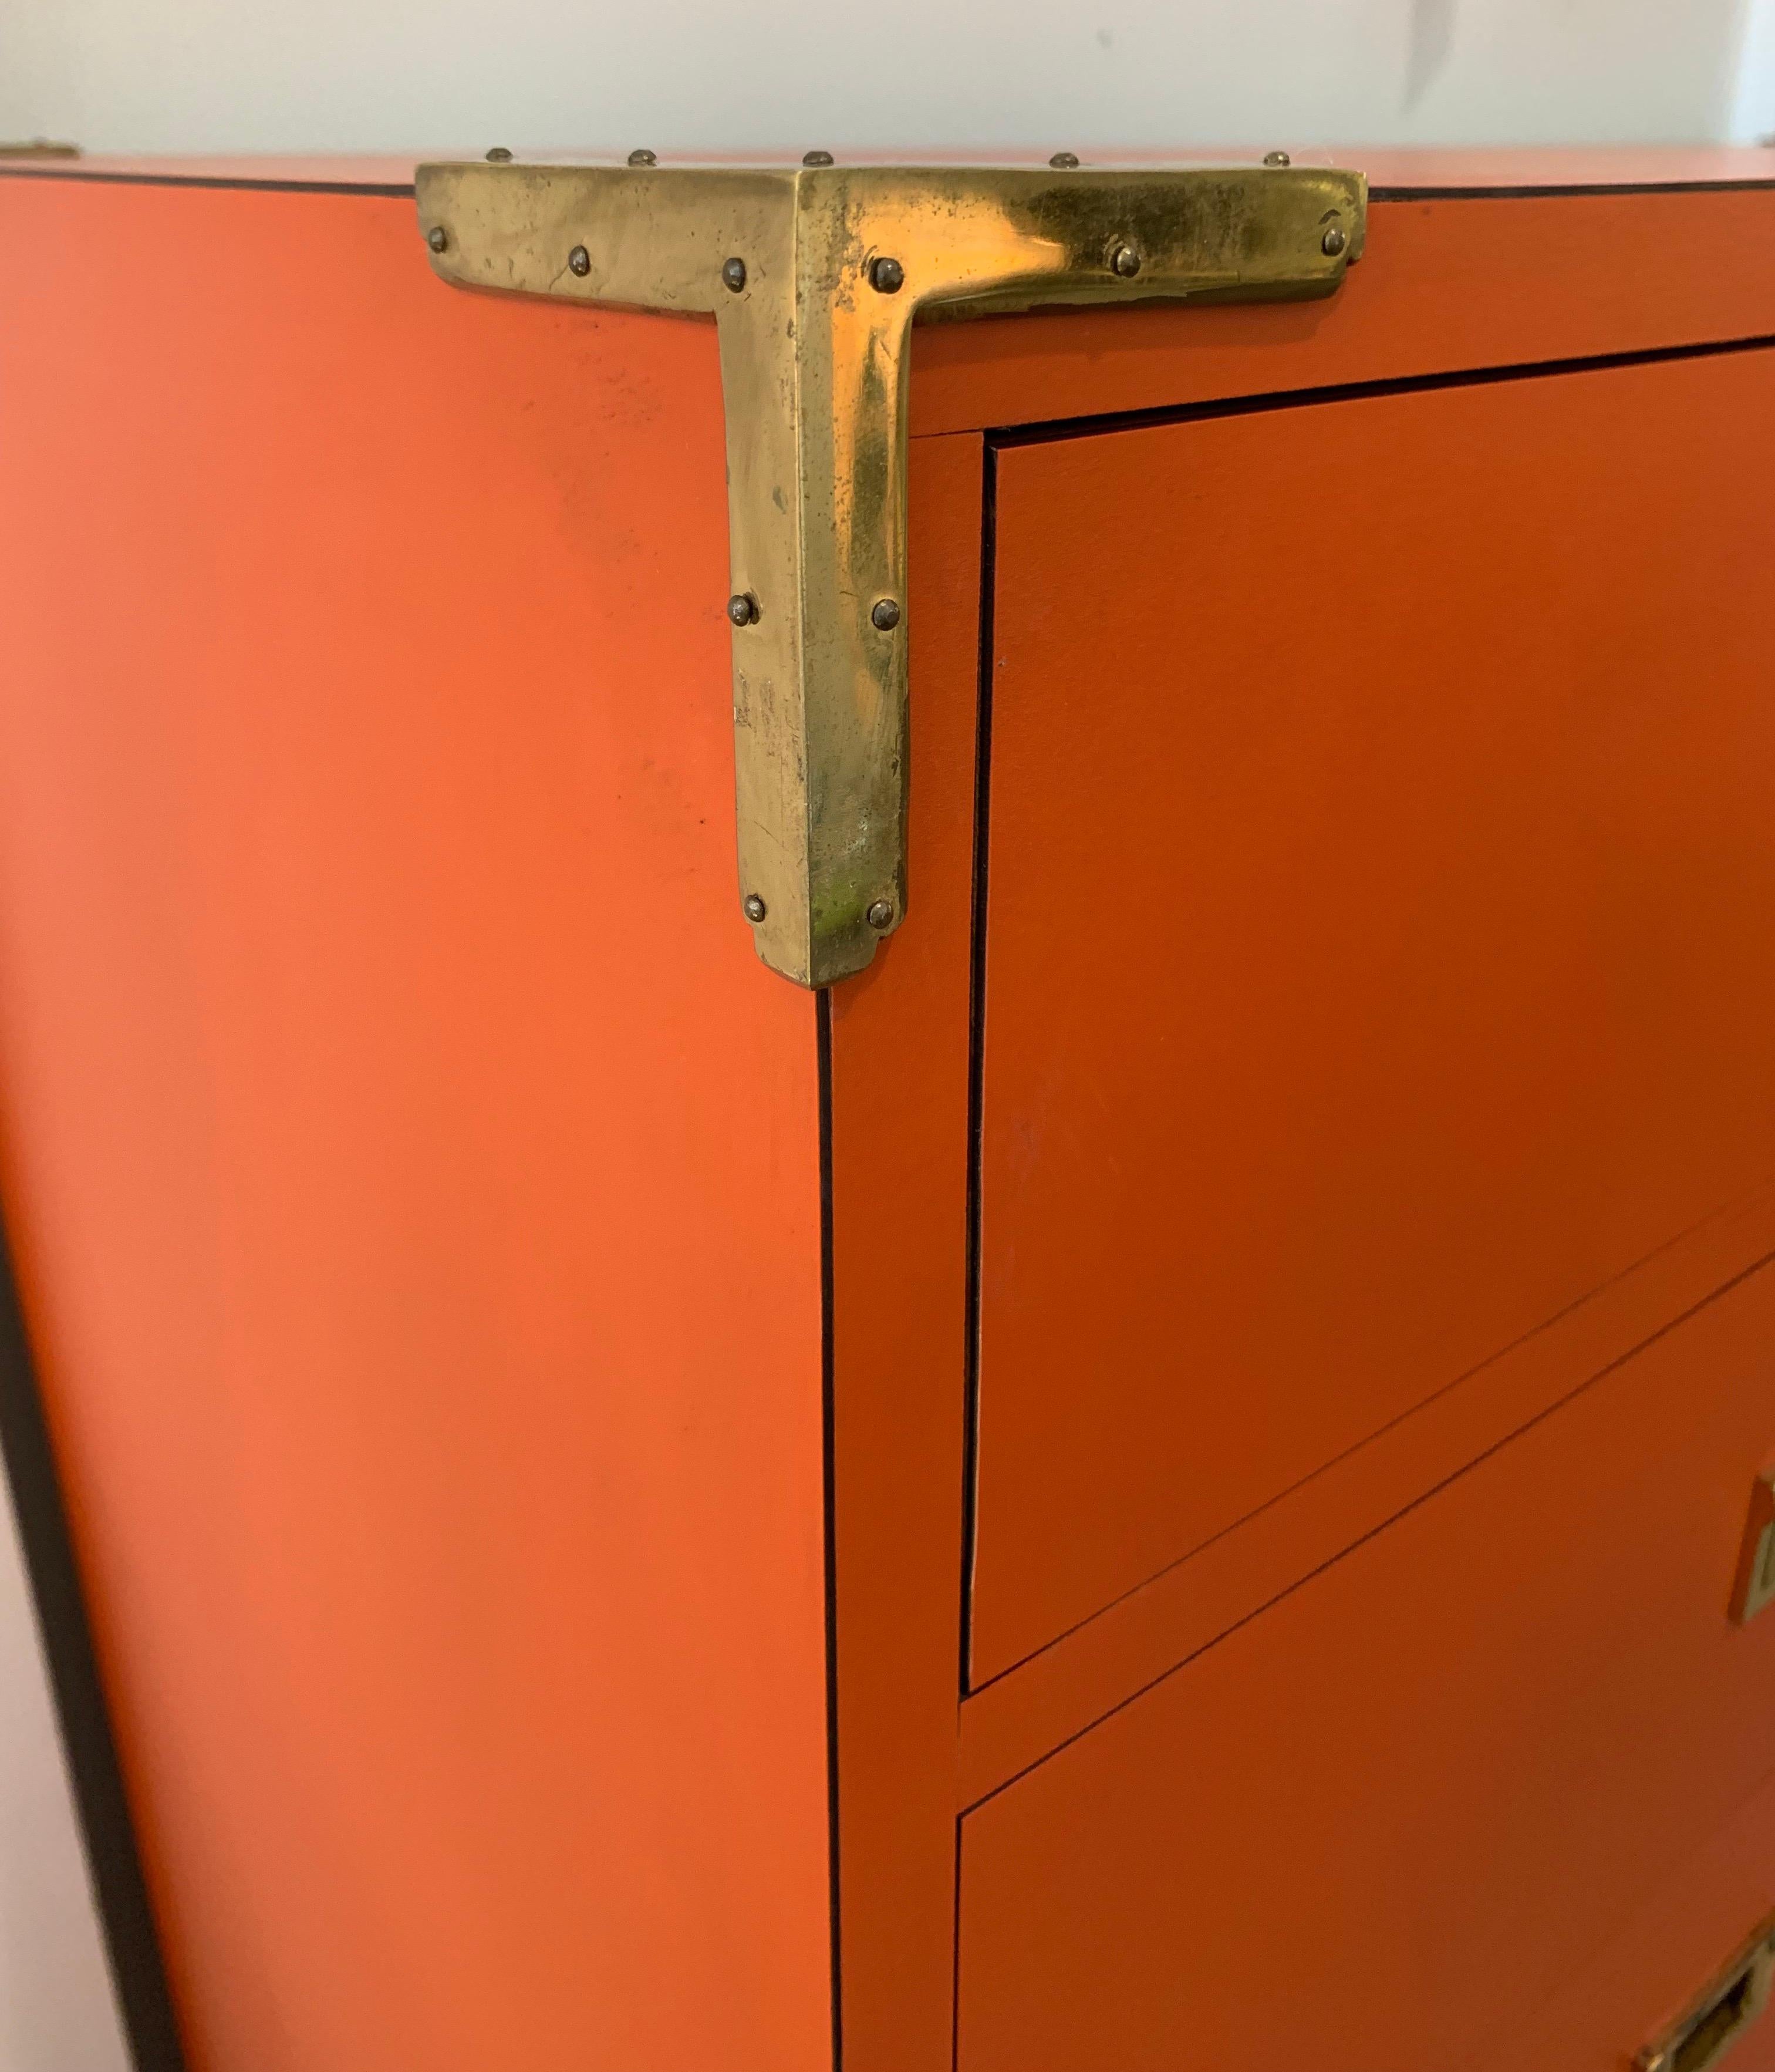 Not easy to find a dresser/highboy with twelve drawers. This one is done in the coveted Hermes orange color with brass hardware and that campaign style look that is always hard to find. Your search is now over. This is the very last piece of this